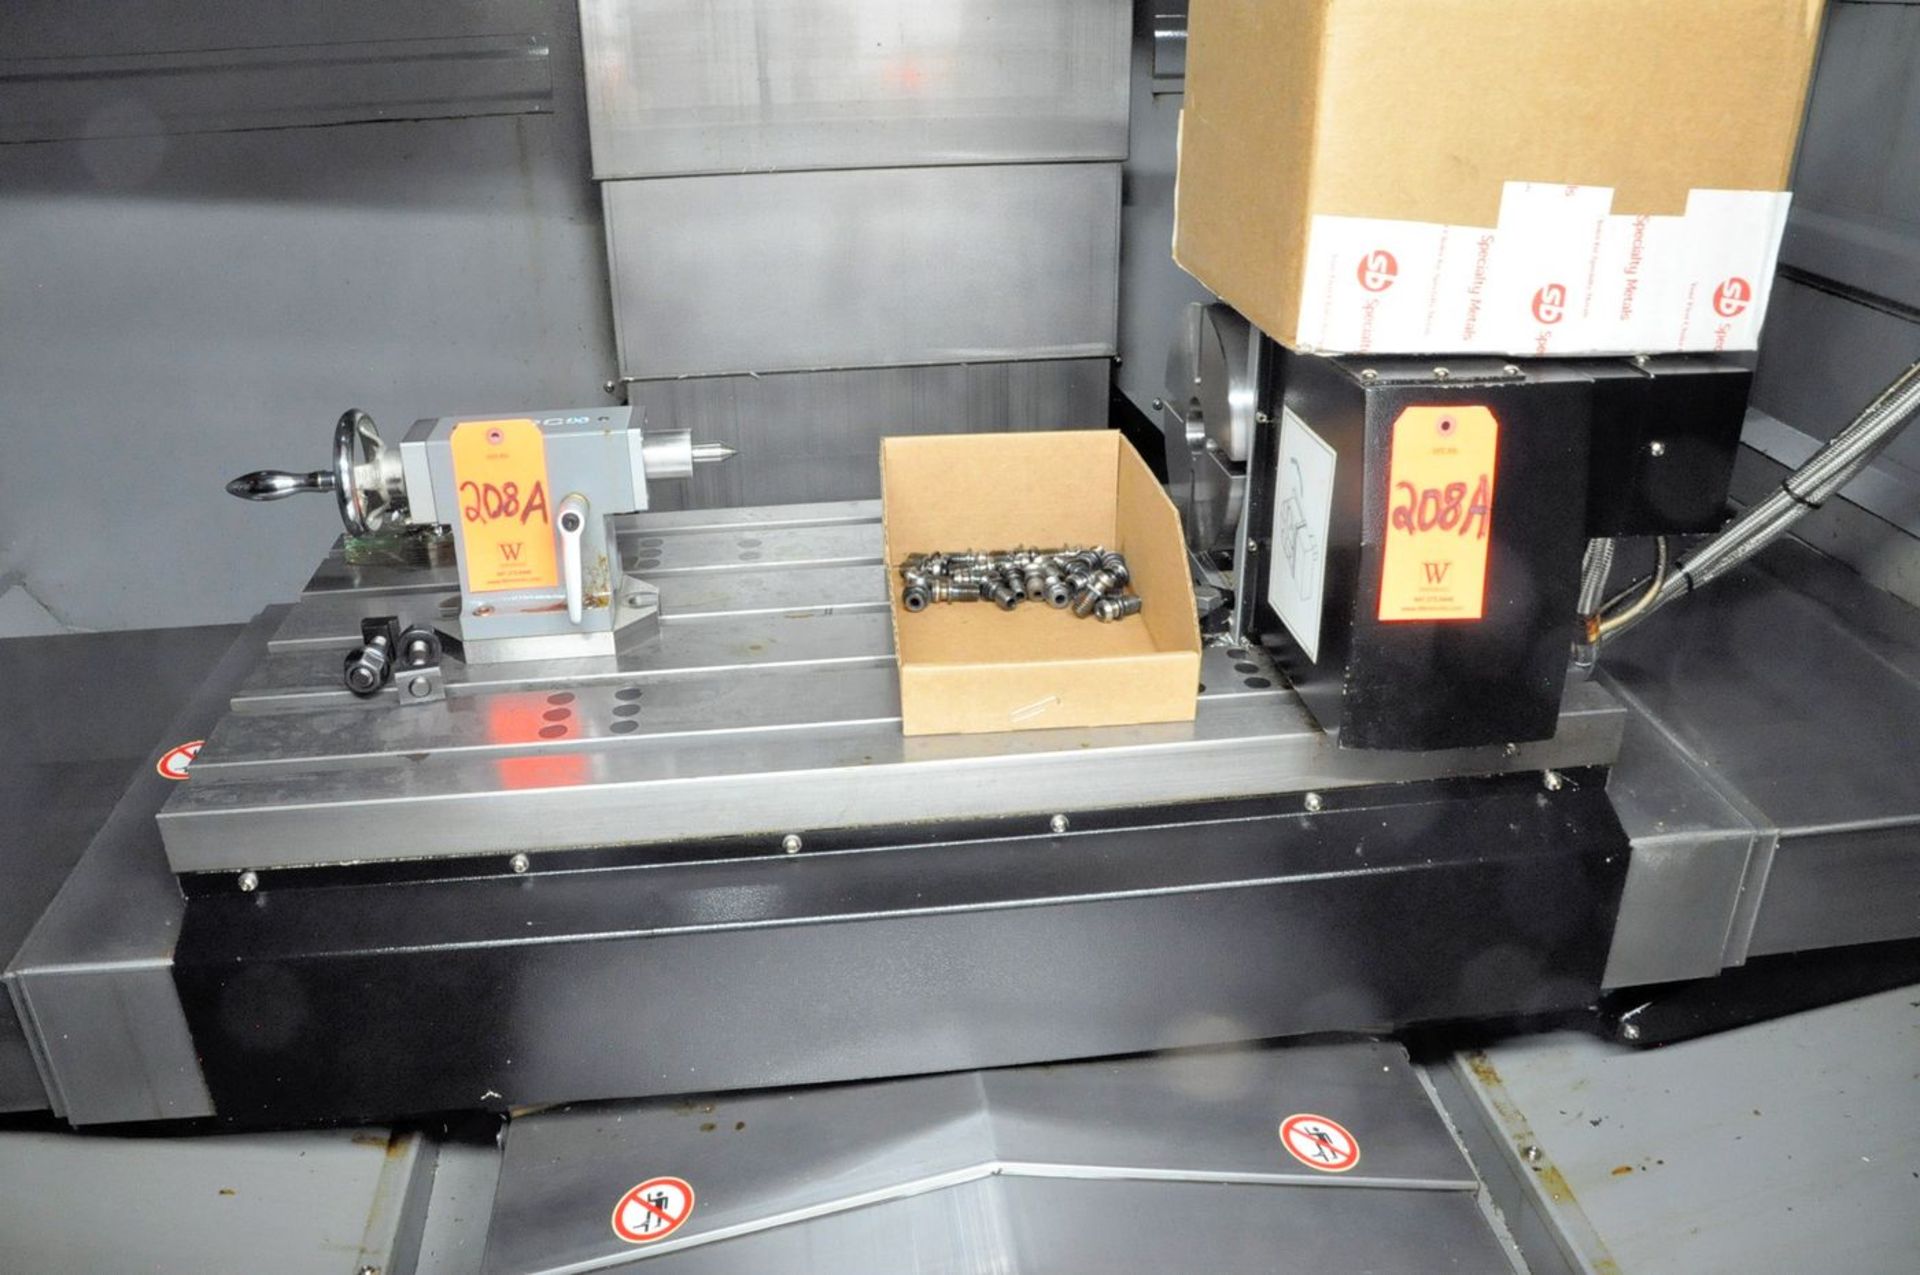 2019 Hurco 4-Axis Model VMX30Di CNC Vertical Machining Center, S/N: S343D1100289AFZCH; with Hurco - Image 5 of 13